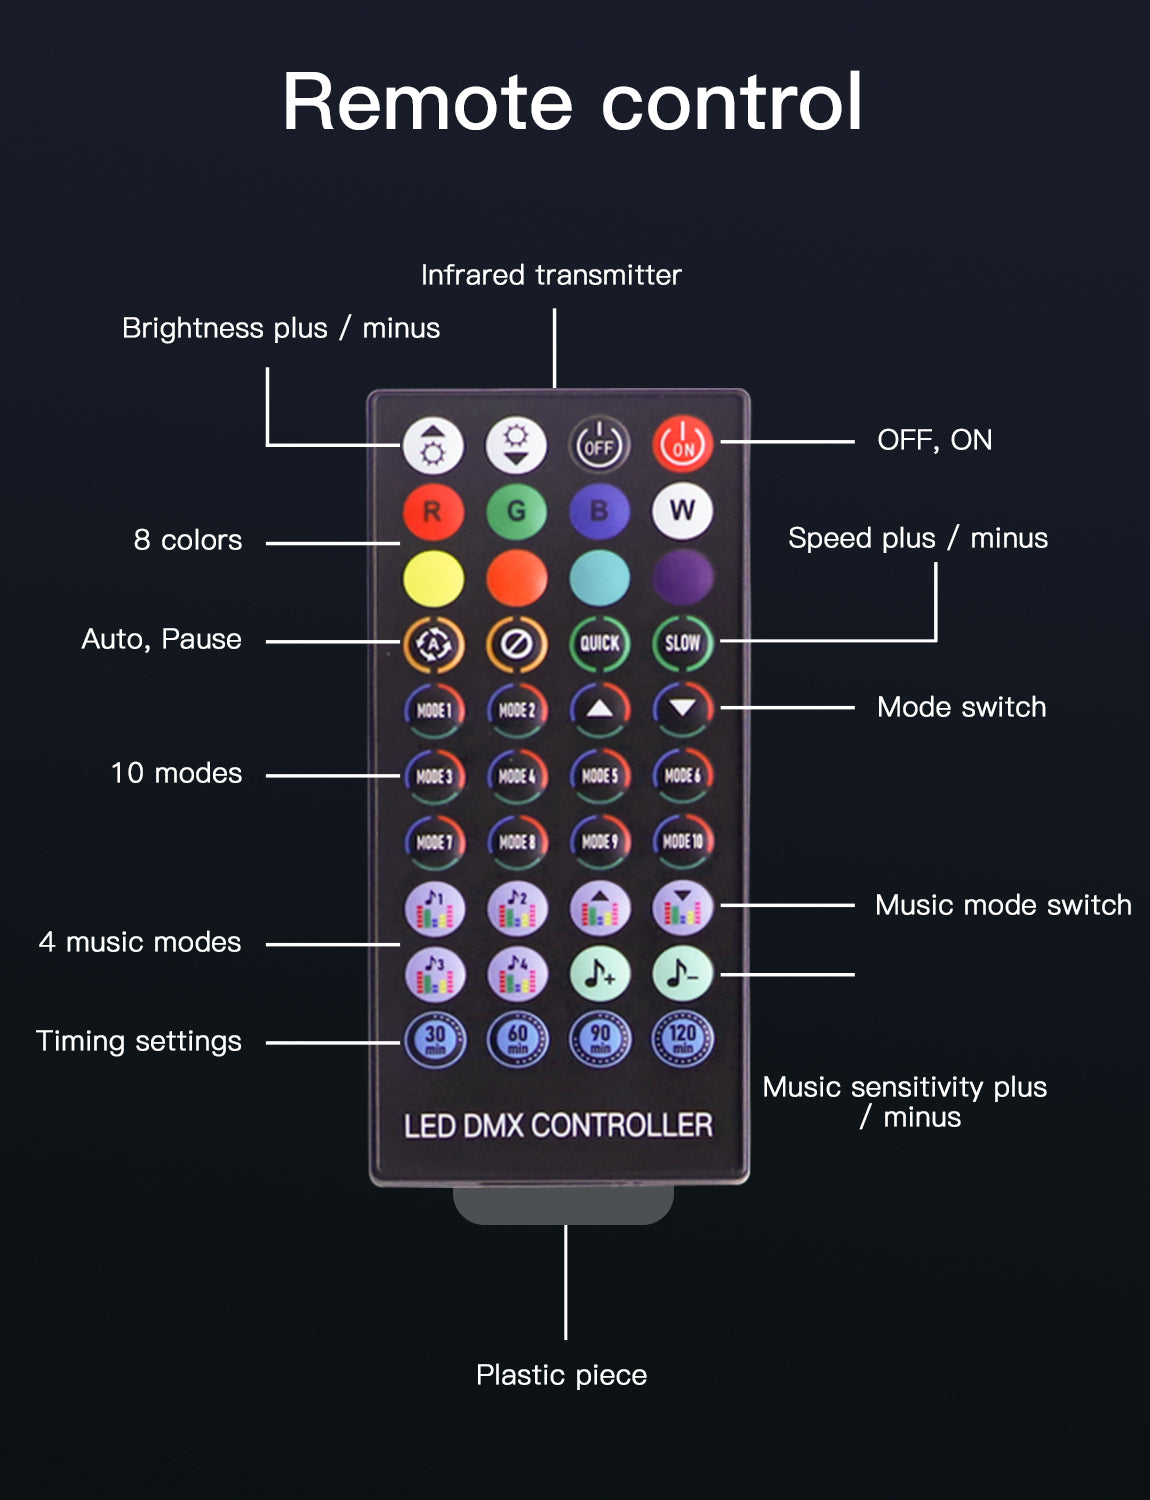 The LED light remote includes buttons for Music mode, Brightness, 4 music modes, and 8 colors. 